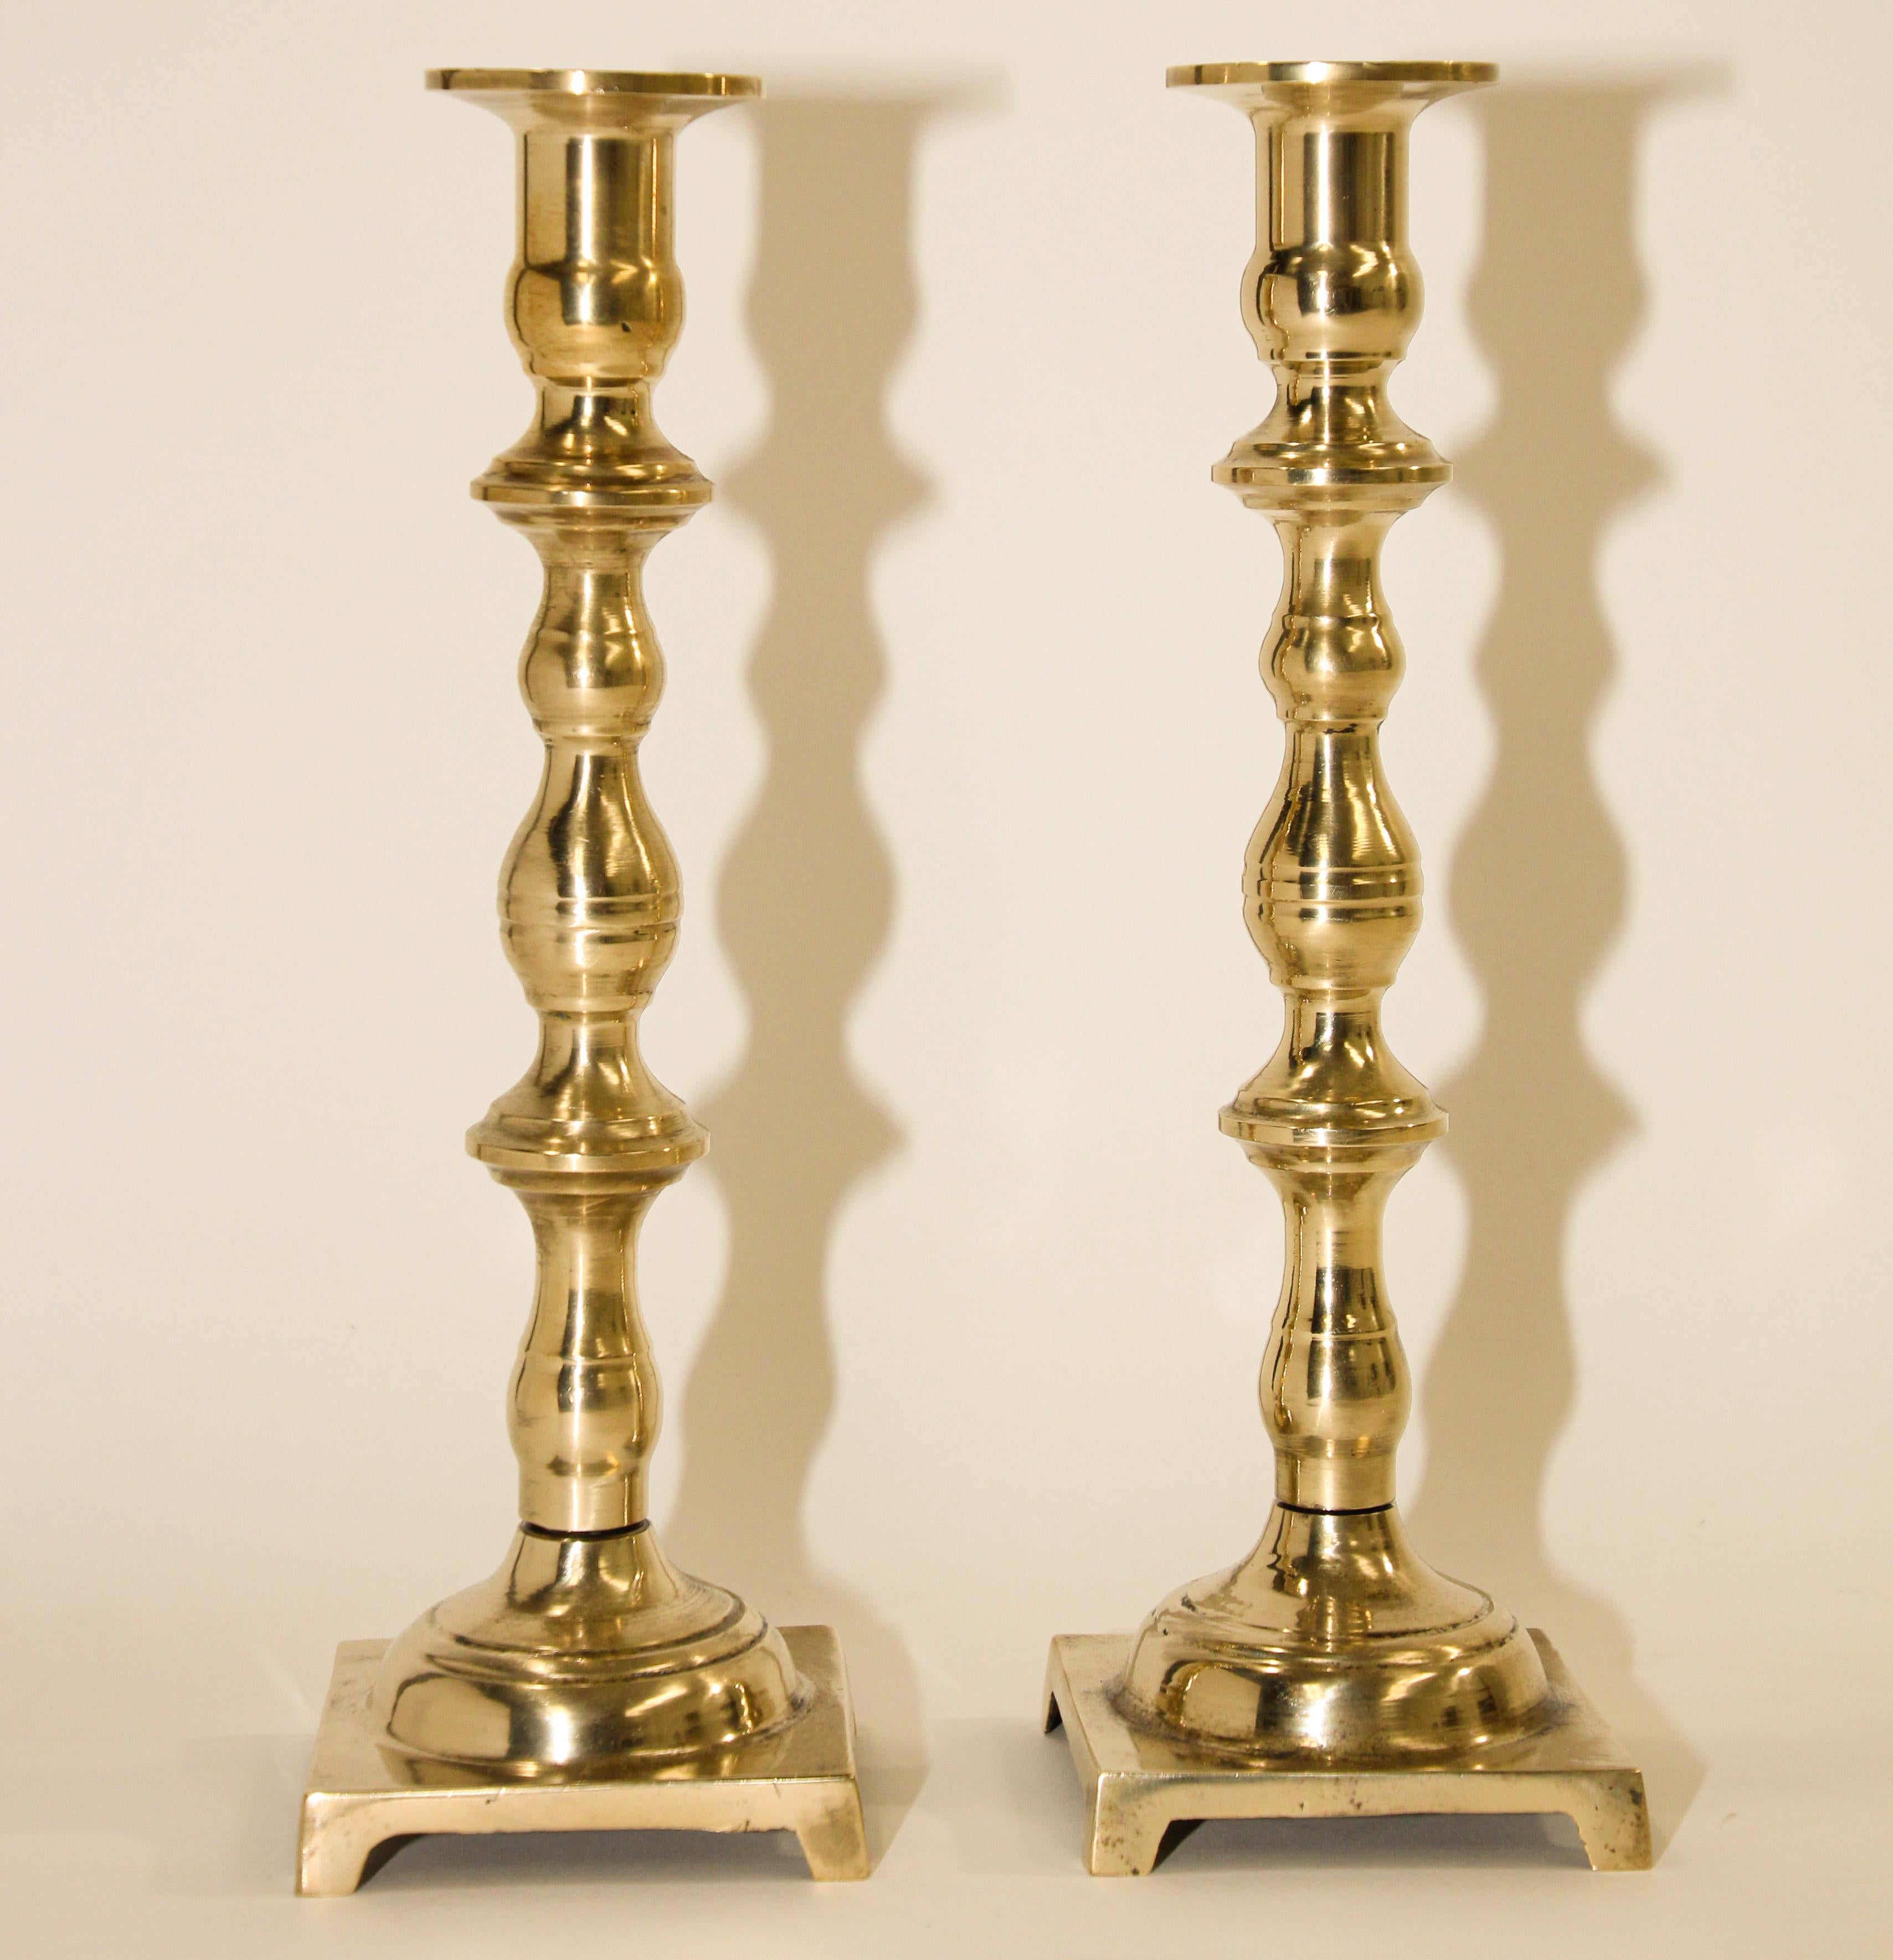 Pair of Georgian Antique Brass Candlesticks
A more unusual fine pair of English solid brass candle holder.
19th century Pair of English antique brass candlesticks that have square base. 
Hand-turned, of very heavy construction, each resting on